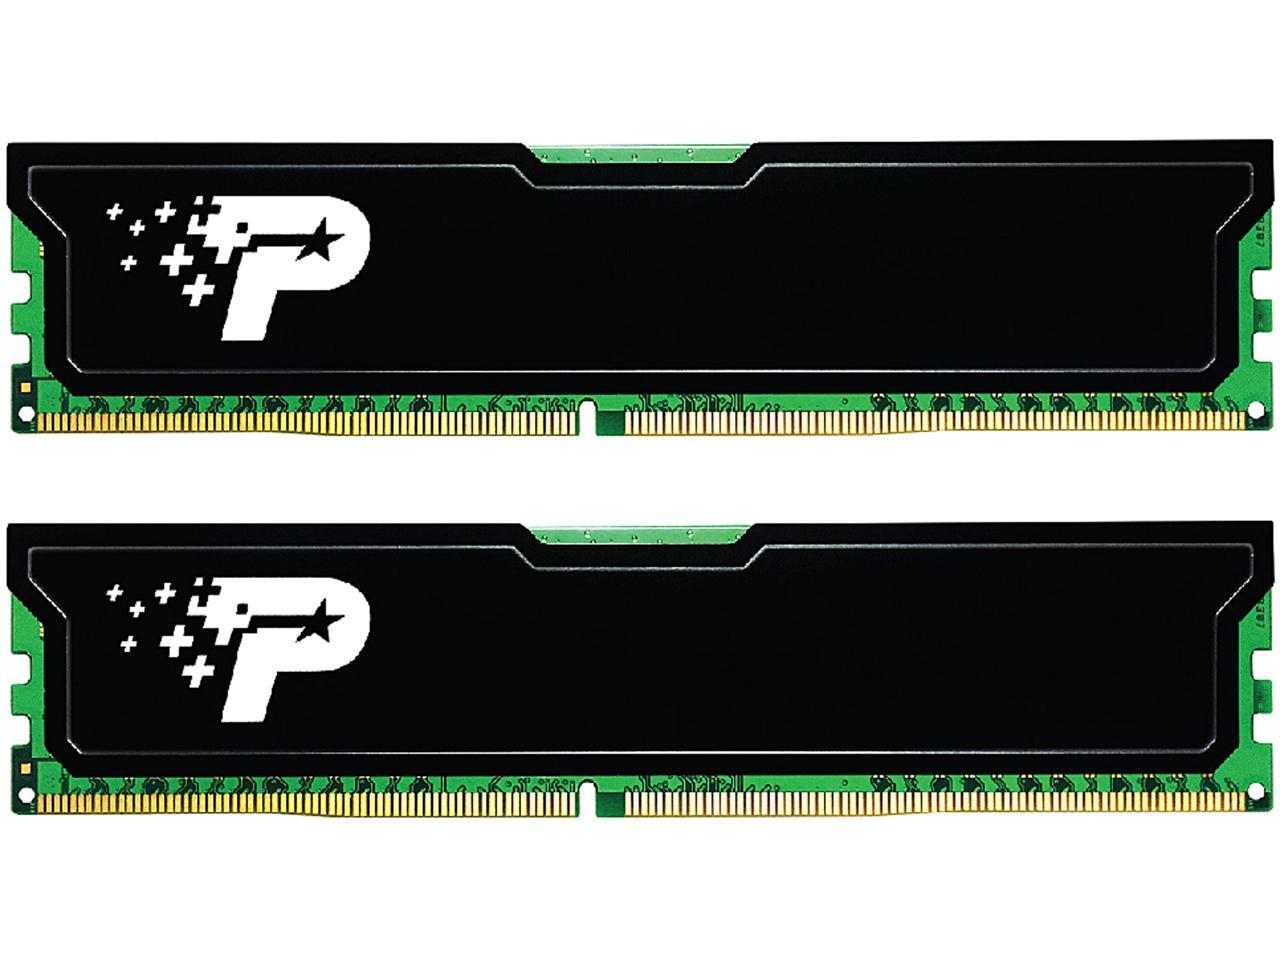 UDIMM Frequency: 2400MHz 1x4GB 1 PSD44G240041 2 Volt Patriot Memory Signature Line DDR4 4GB PC4-19200